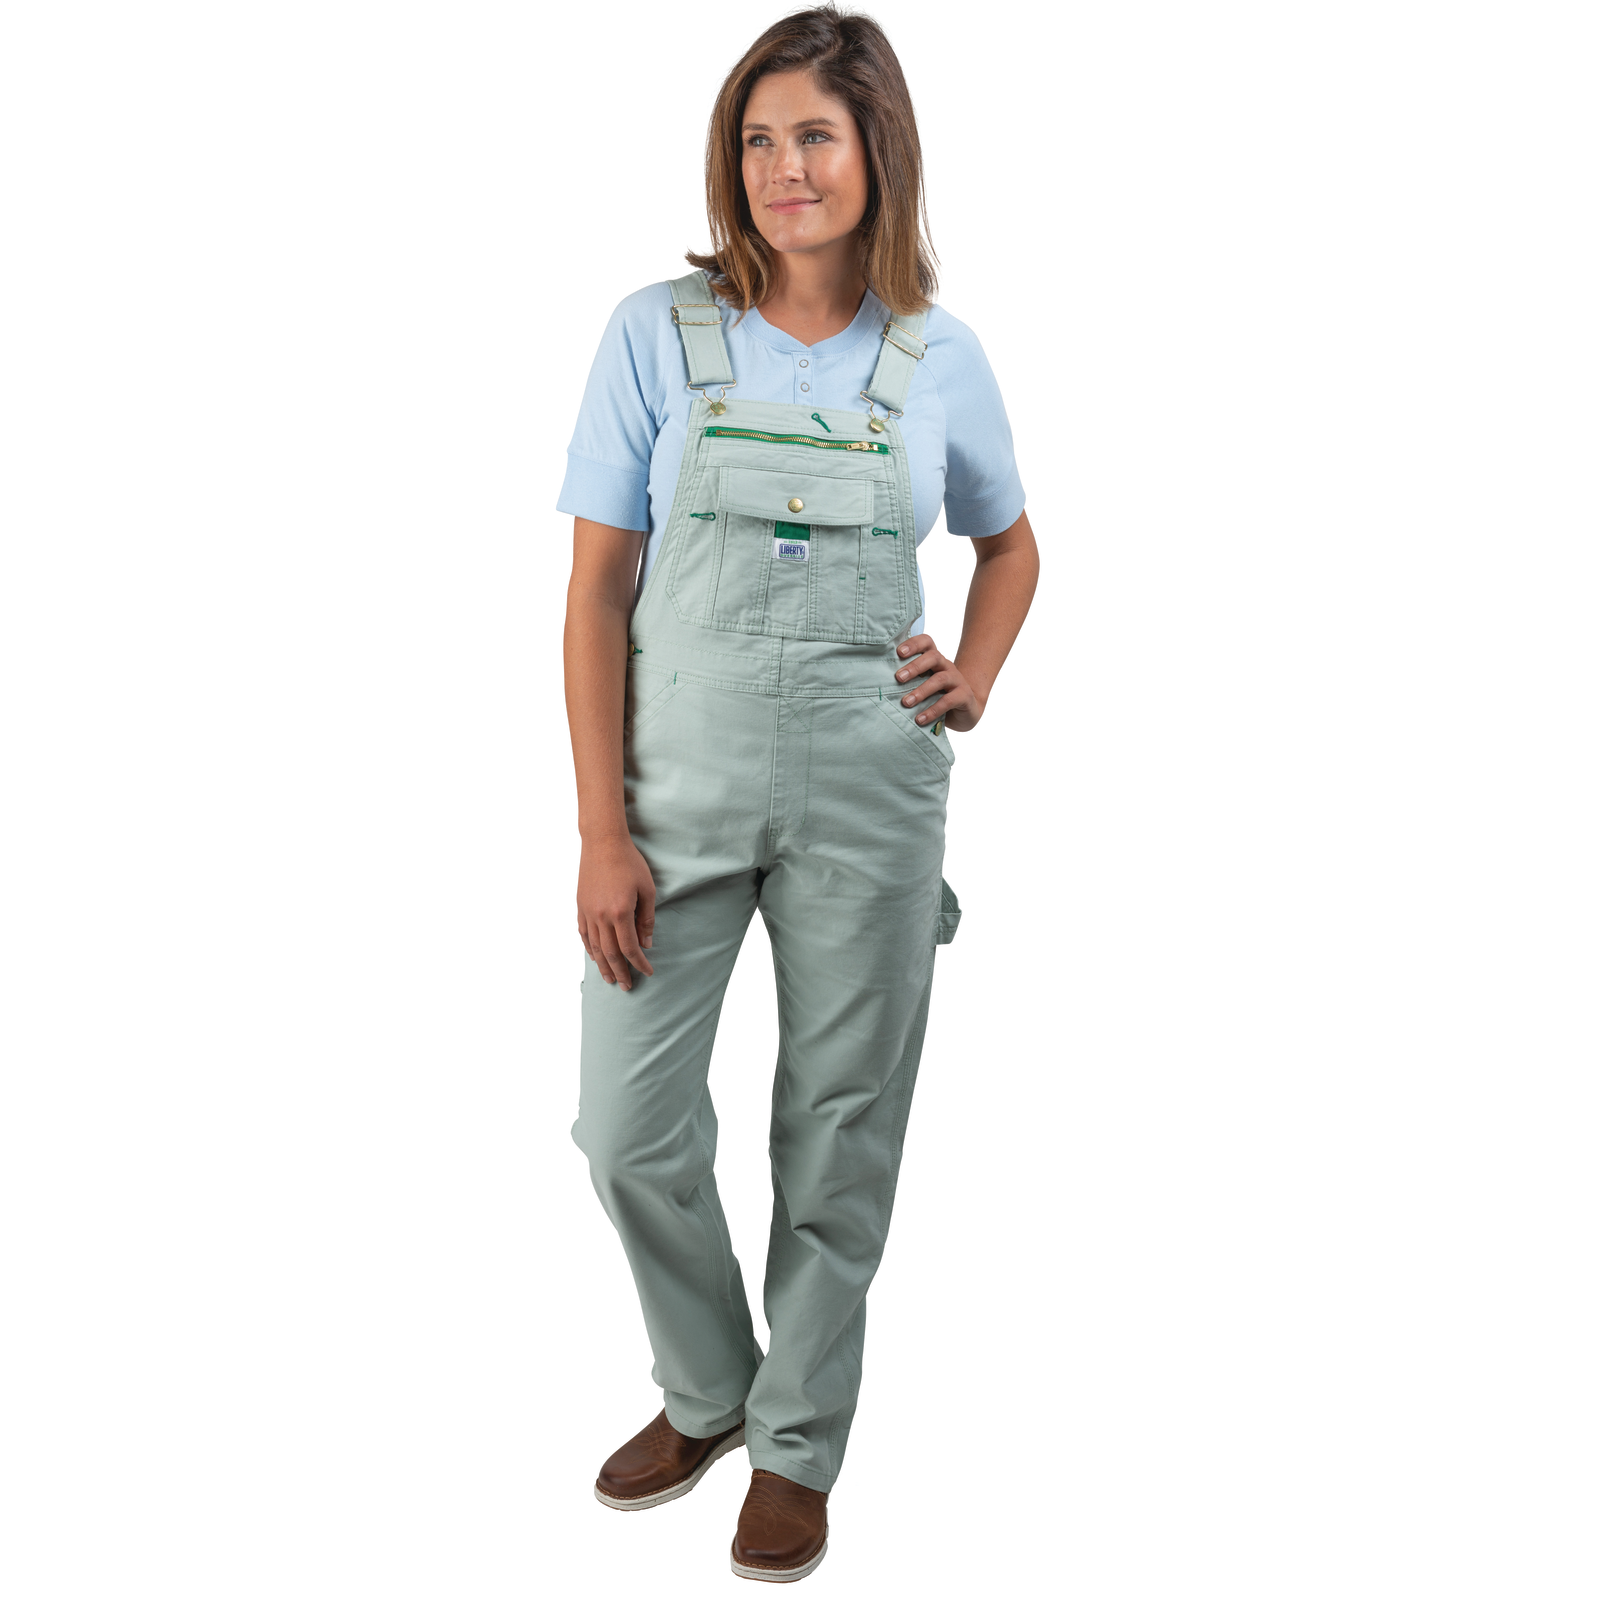 Lady Liberty Bibs for Women  Functional and Stylish Overalls